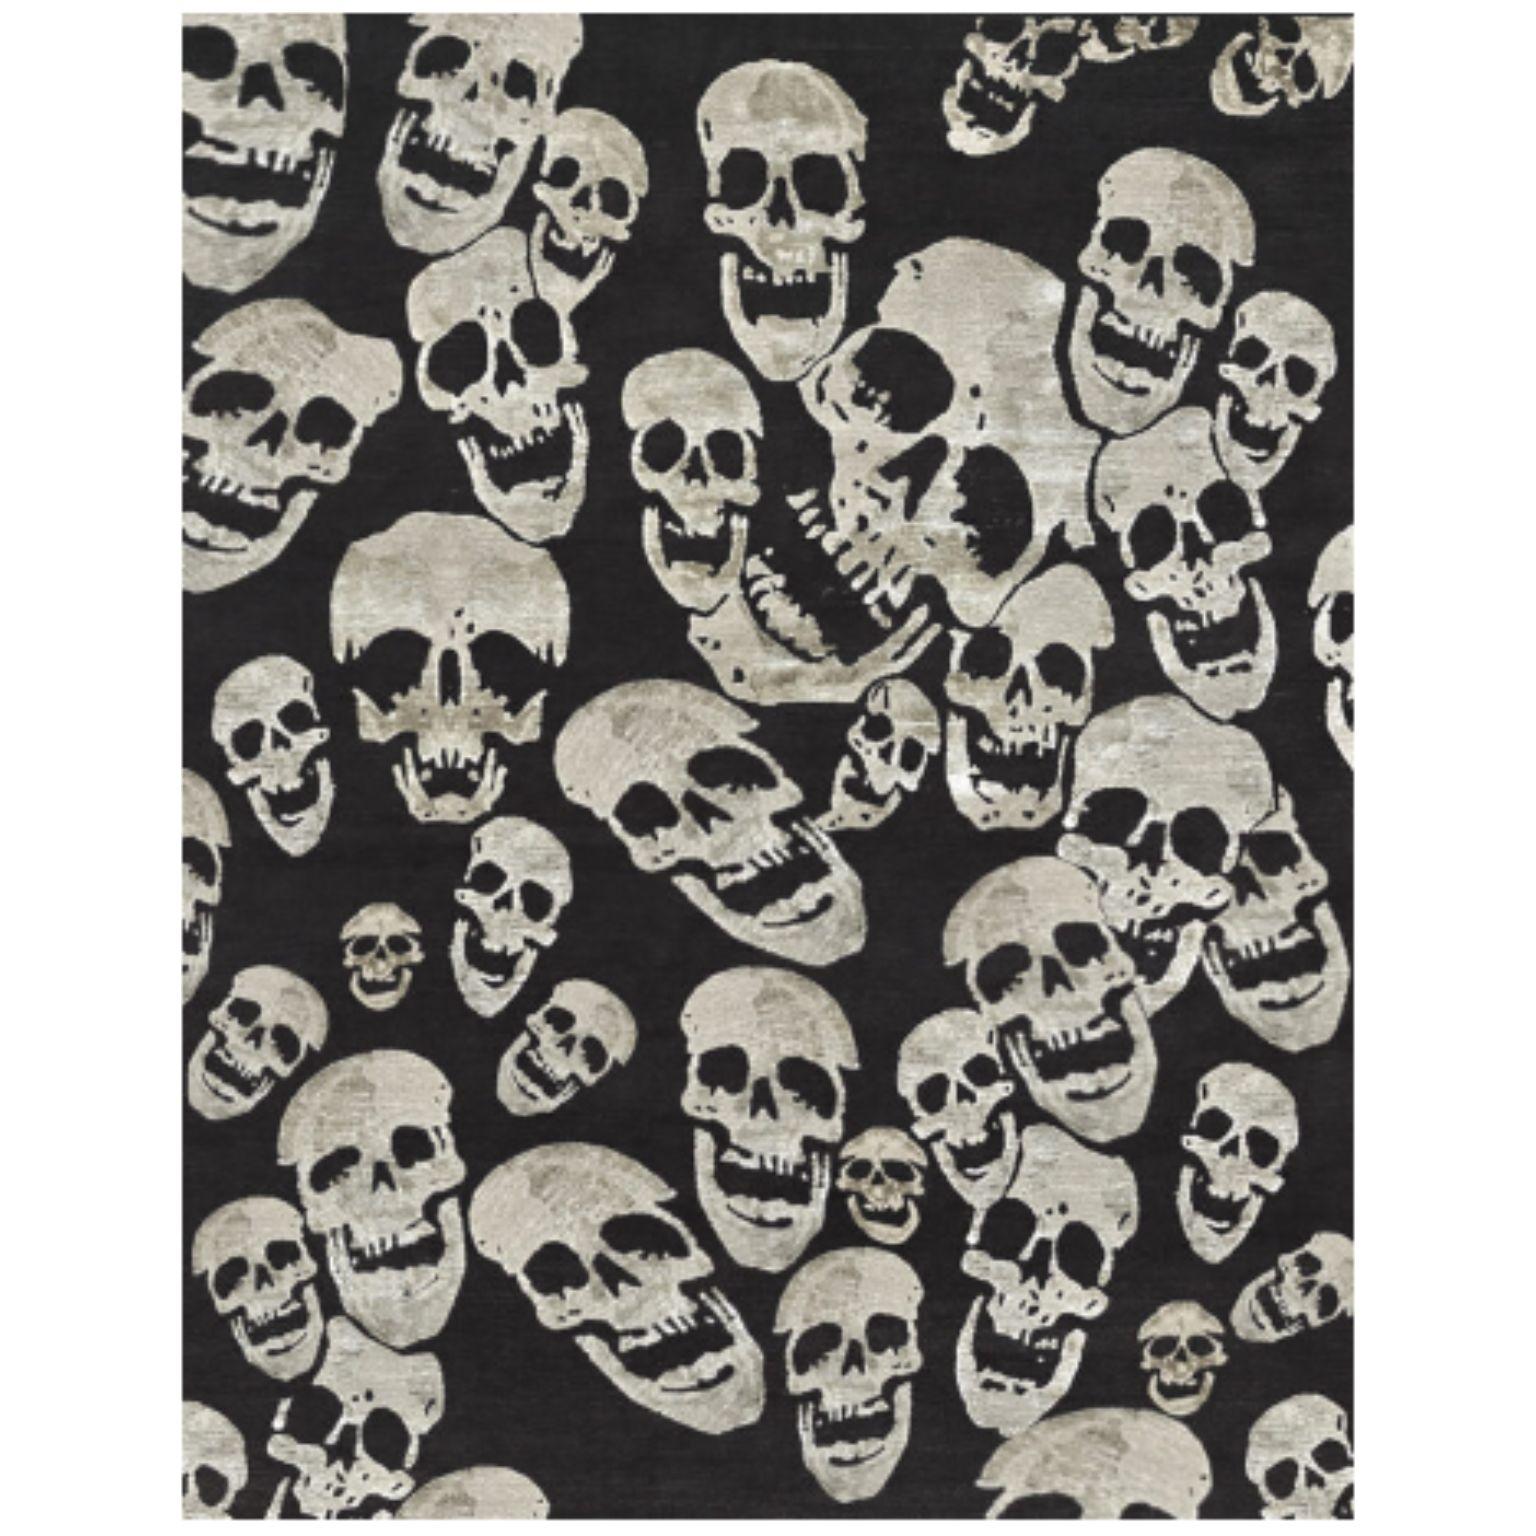 SKULL & BONES 200 rug by Illulian
Dimensions: D300 x H200 cm 
Materials: wool 50%, silk 50%
Variations available and prices may vary according to materials and sizes. 

Illulian, historic and prestigious rug company brand, internationally